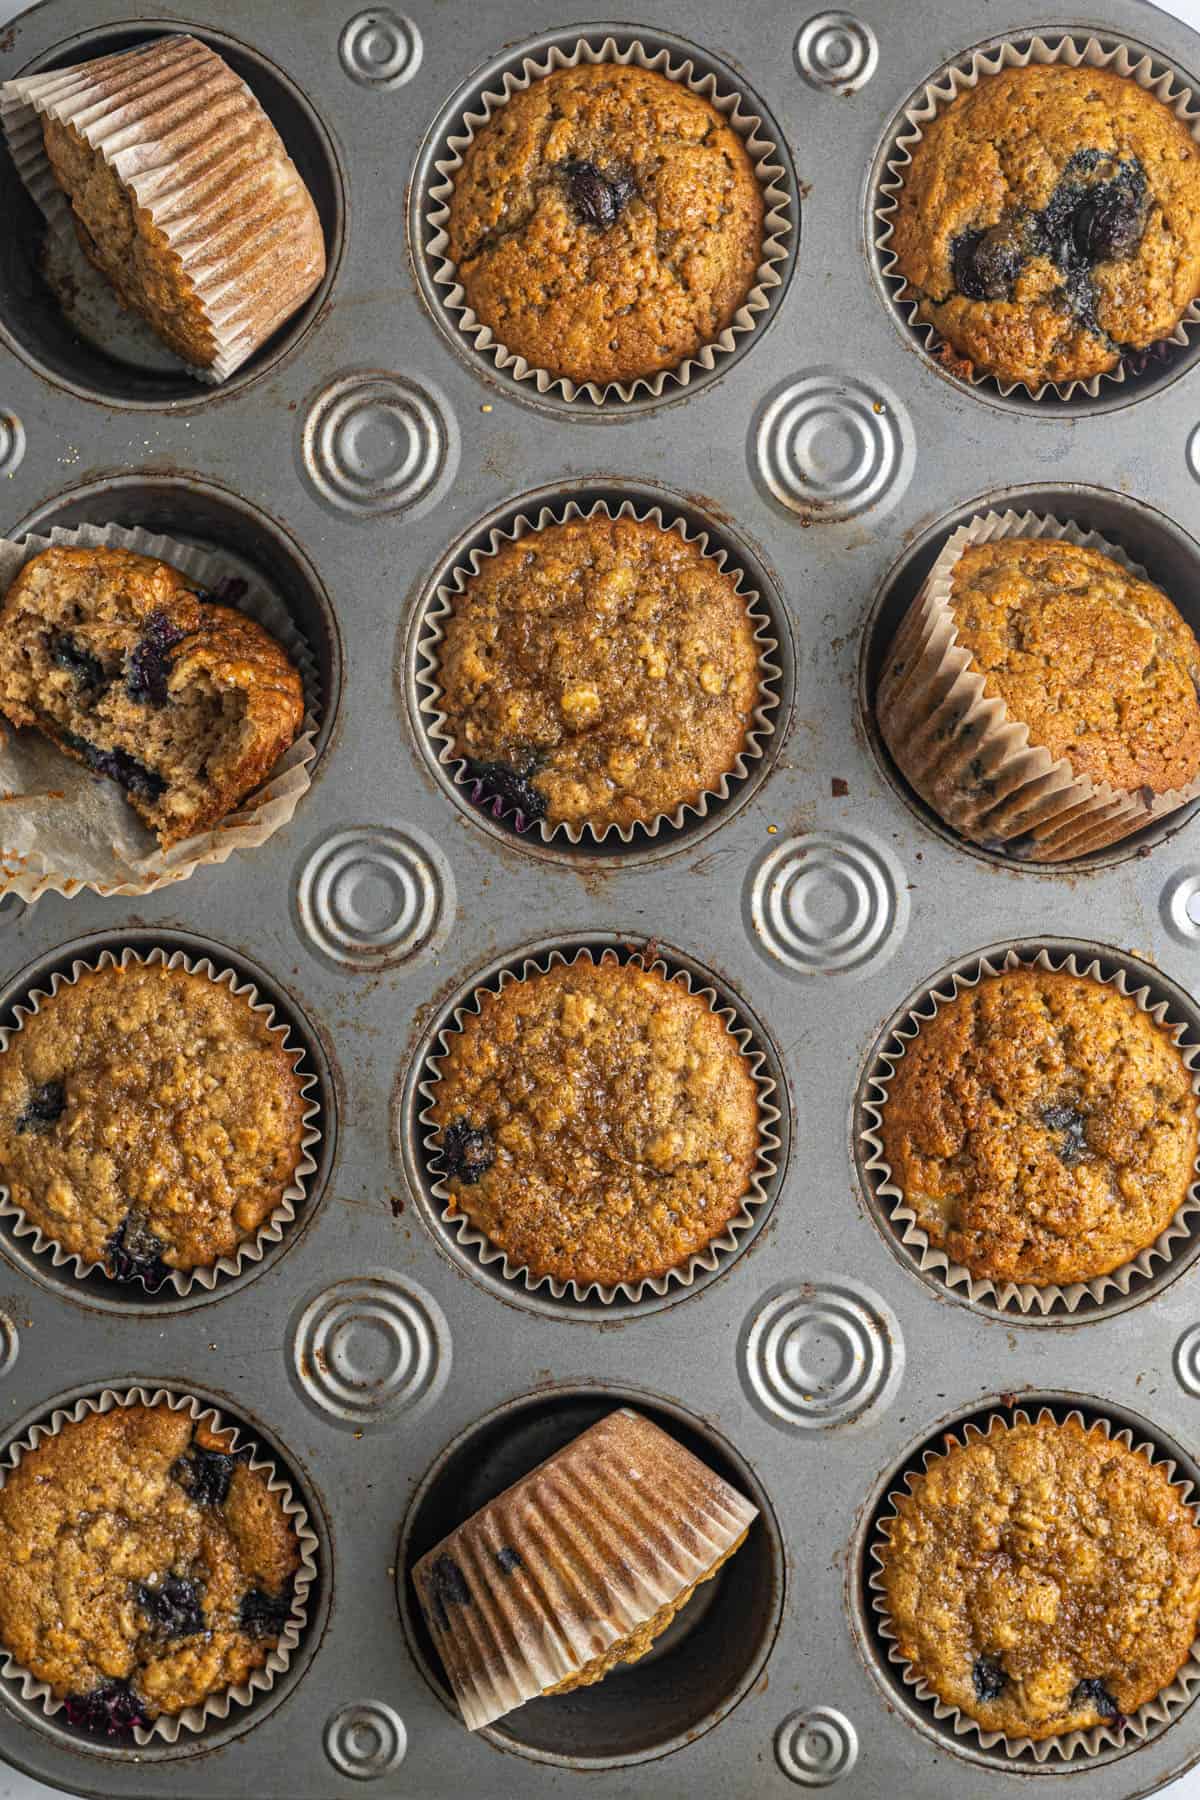 This image shows the finished Blueberry Banana Oat Muffins. They have been baked and are cooling.